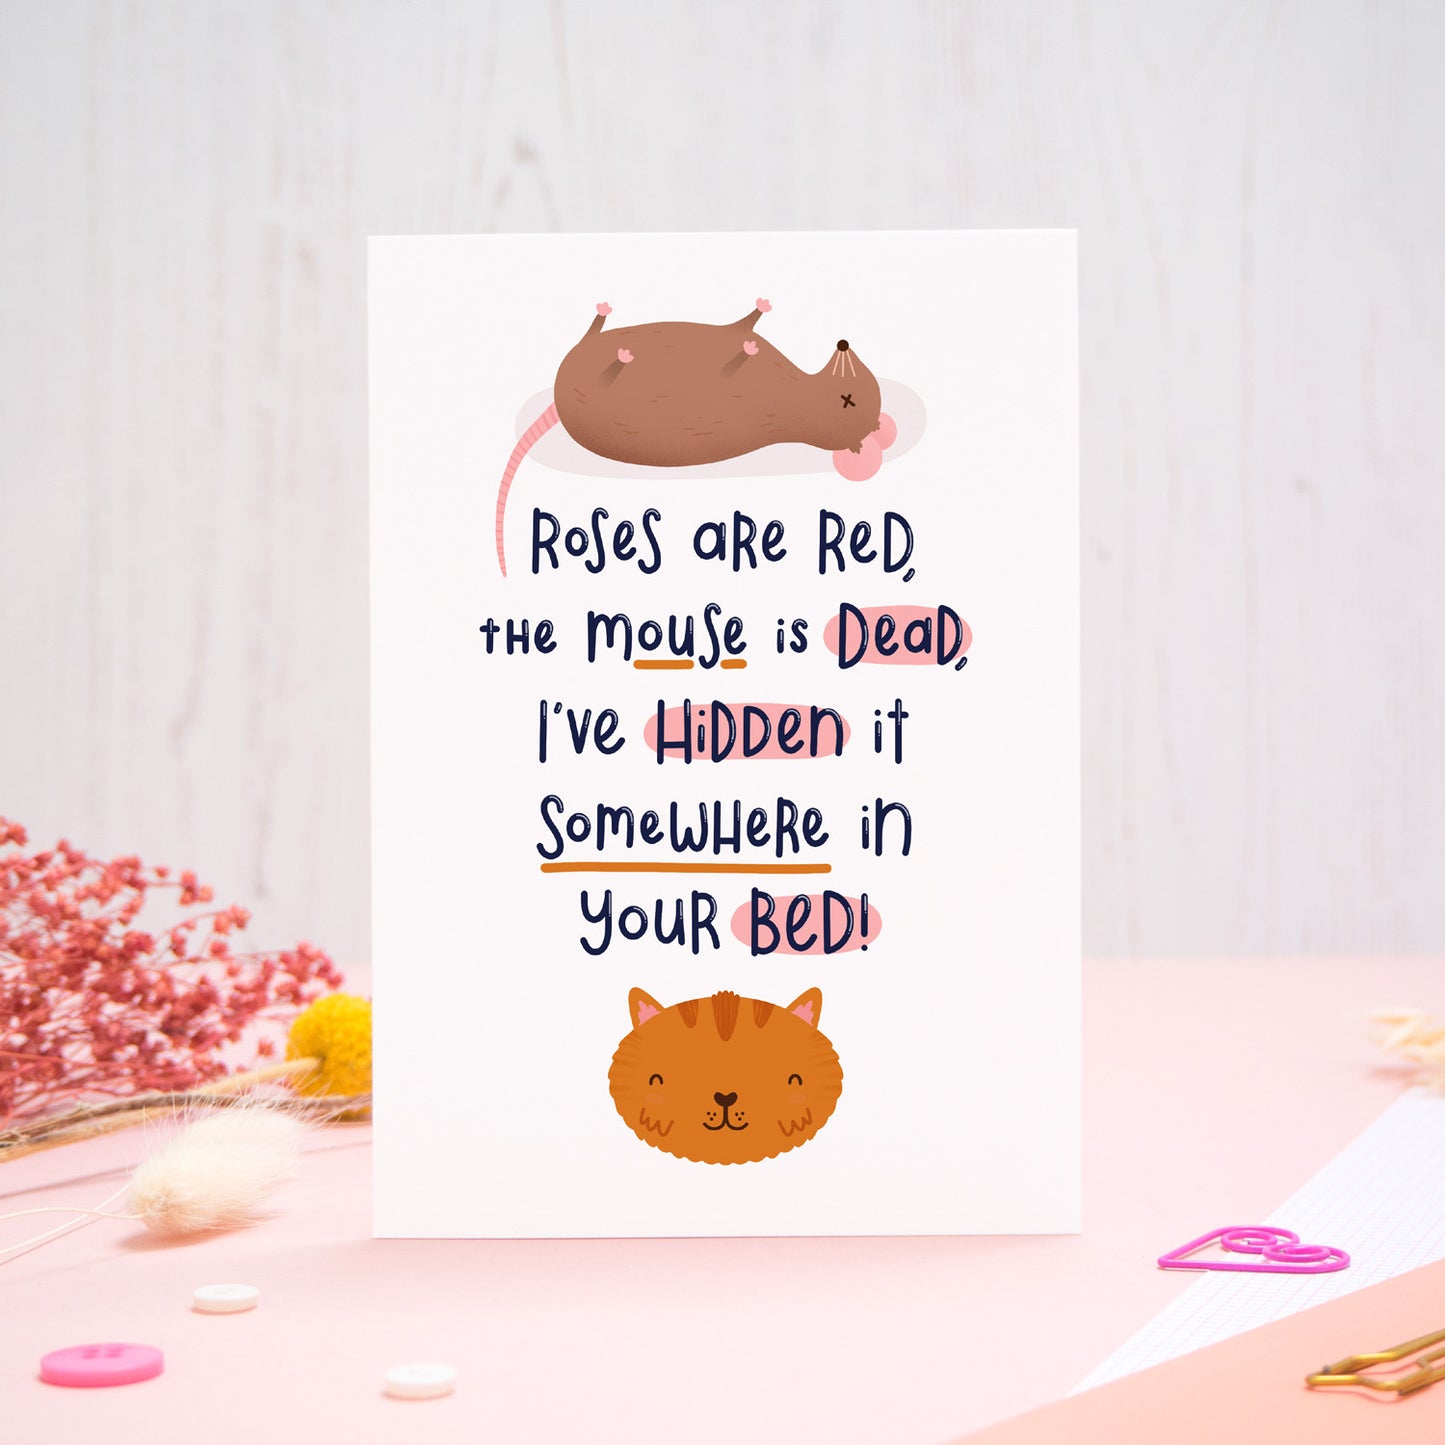 A Valentine’s ‘from the cat’ card featuring a ‘roses are red’ rhyme, photographed stood on a pink and white background with floral props, paper clips, and buttons. 